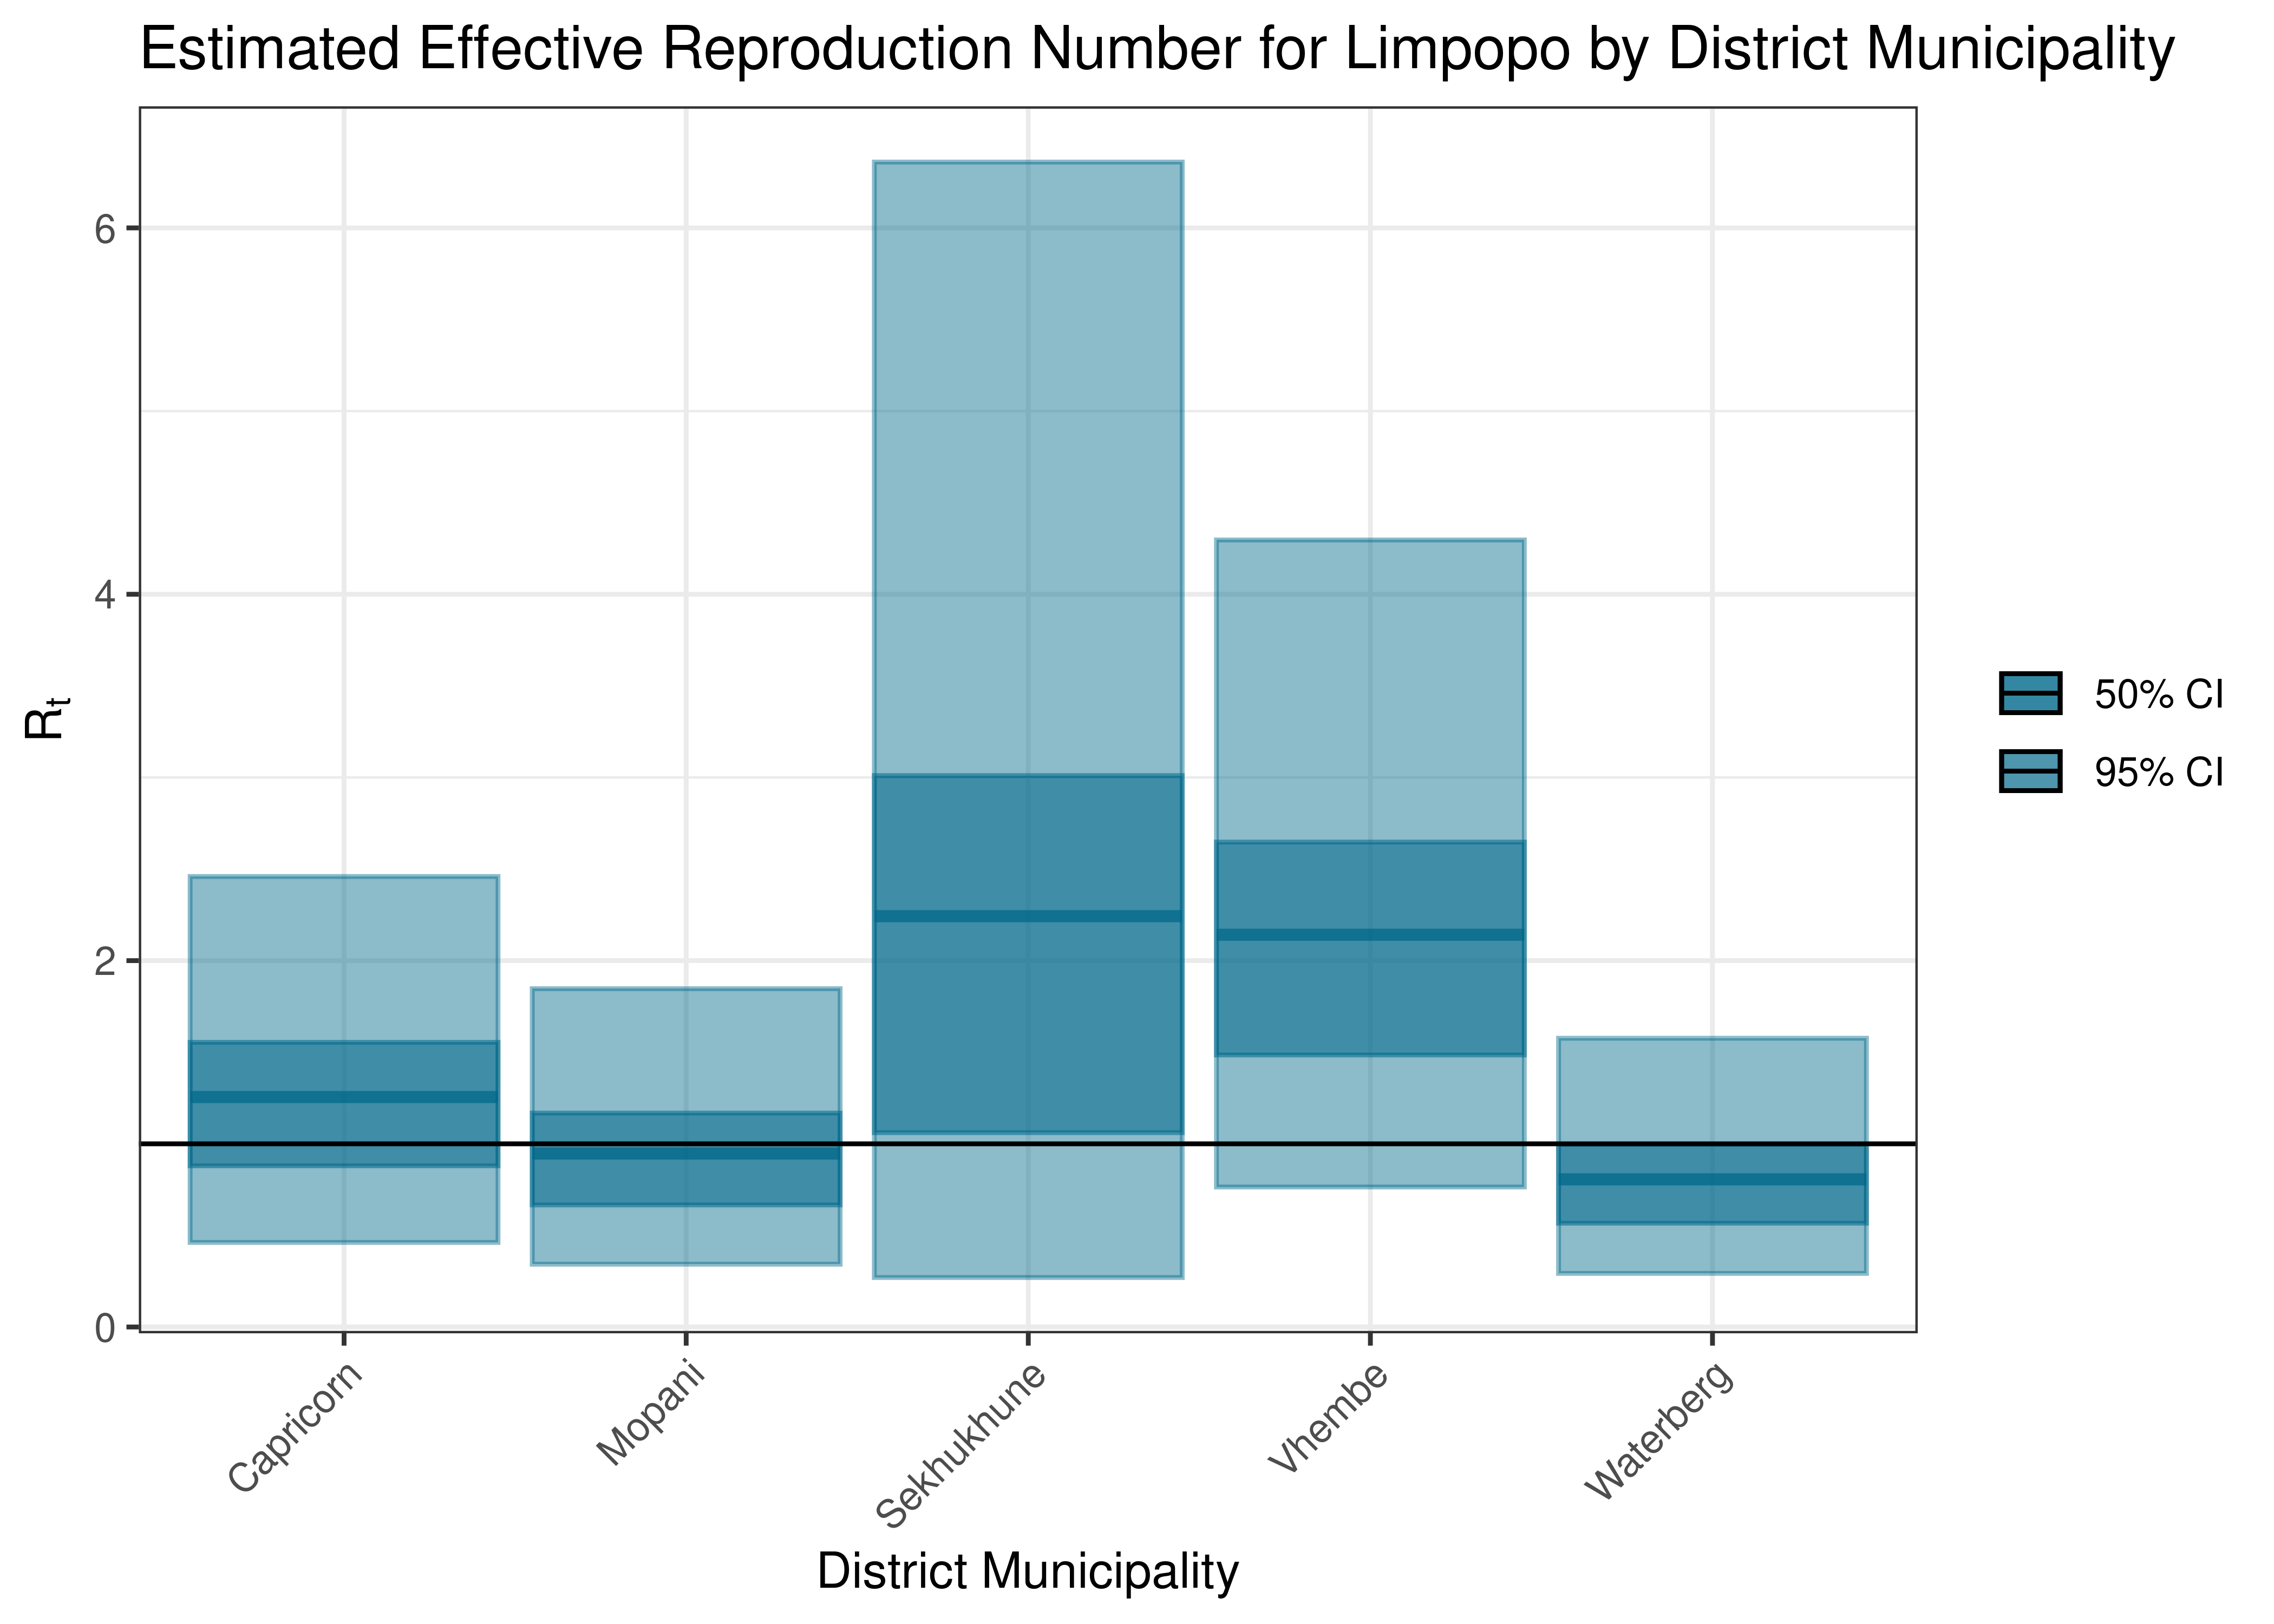 Estimated Effective Reproduction Number for Limpopo by District Municipality